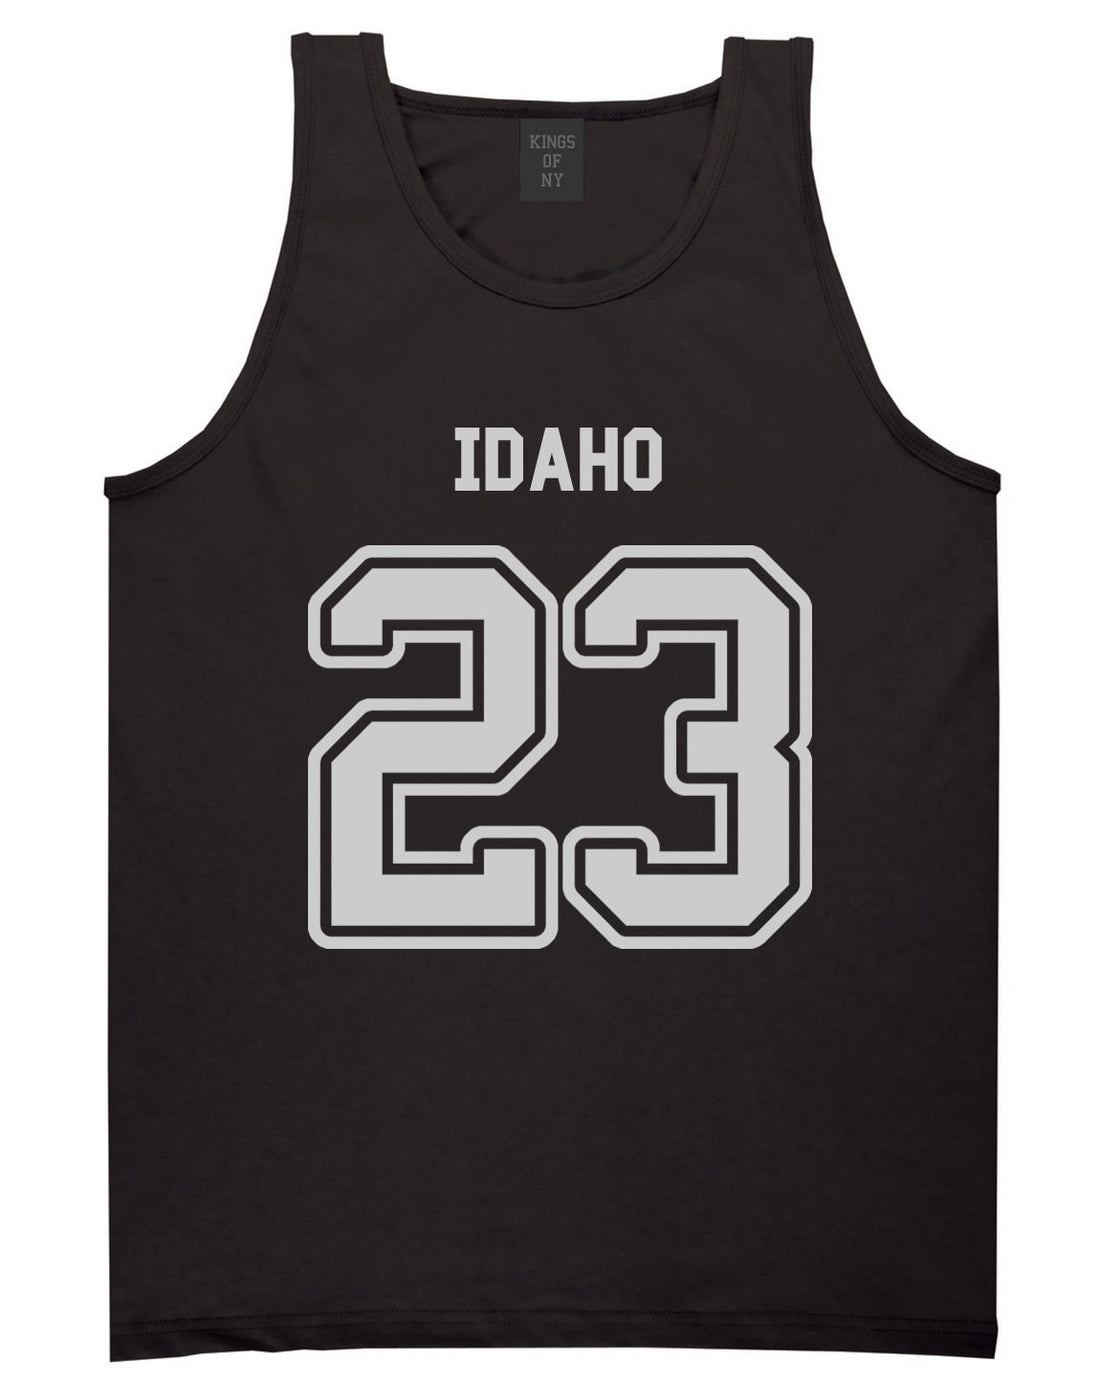 Sport Style Idaho 23 Team State Jersey Mens Tank Top By Kings Of NY